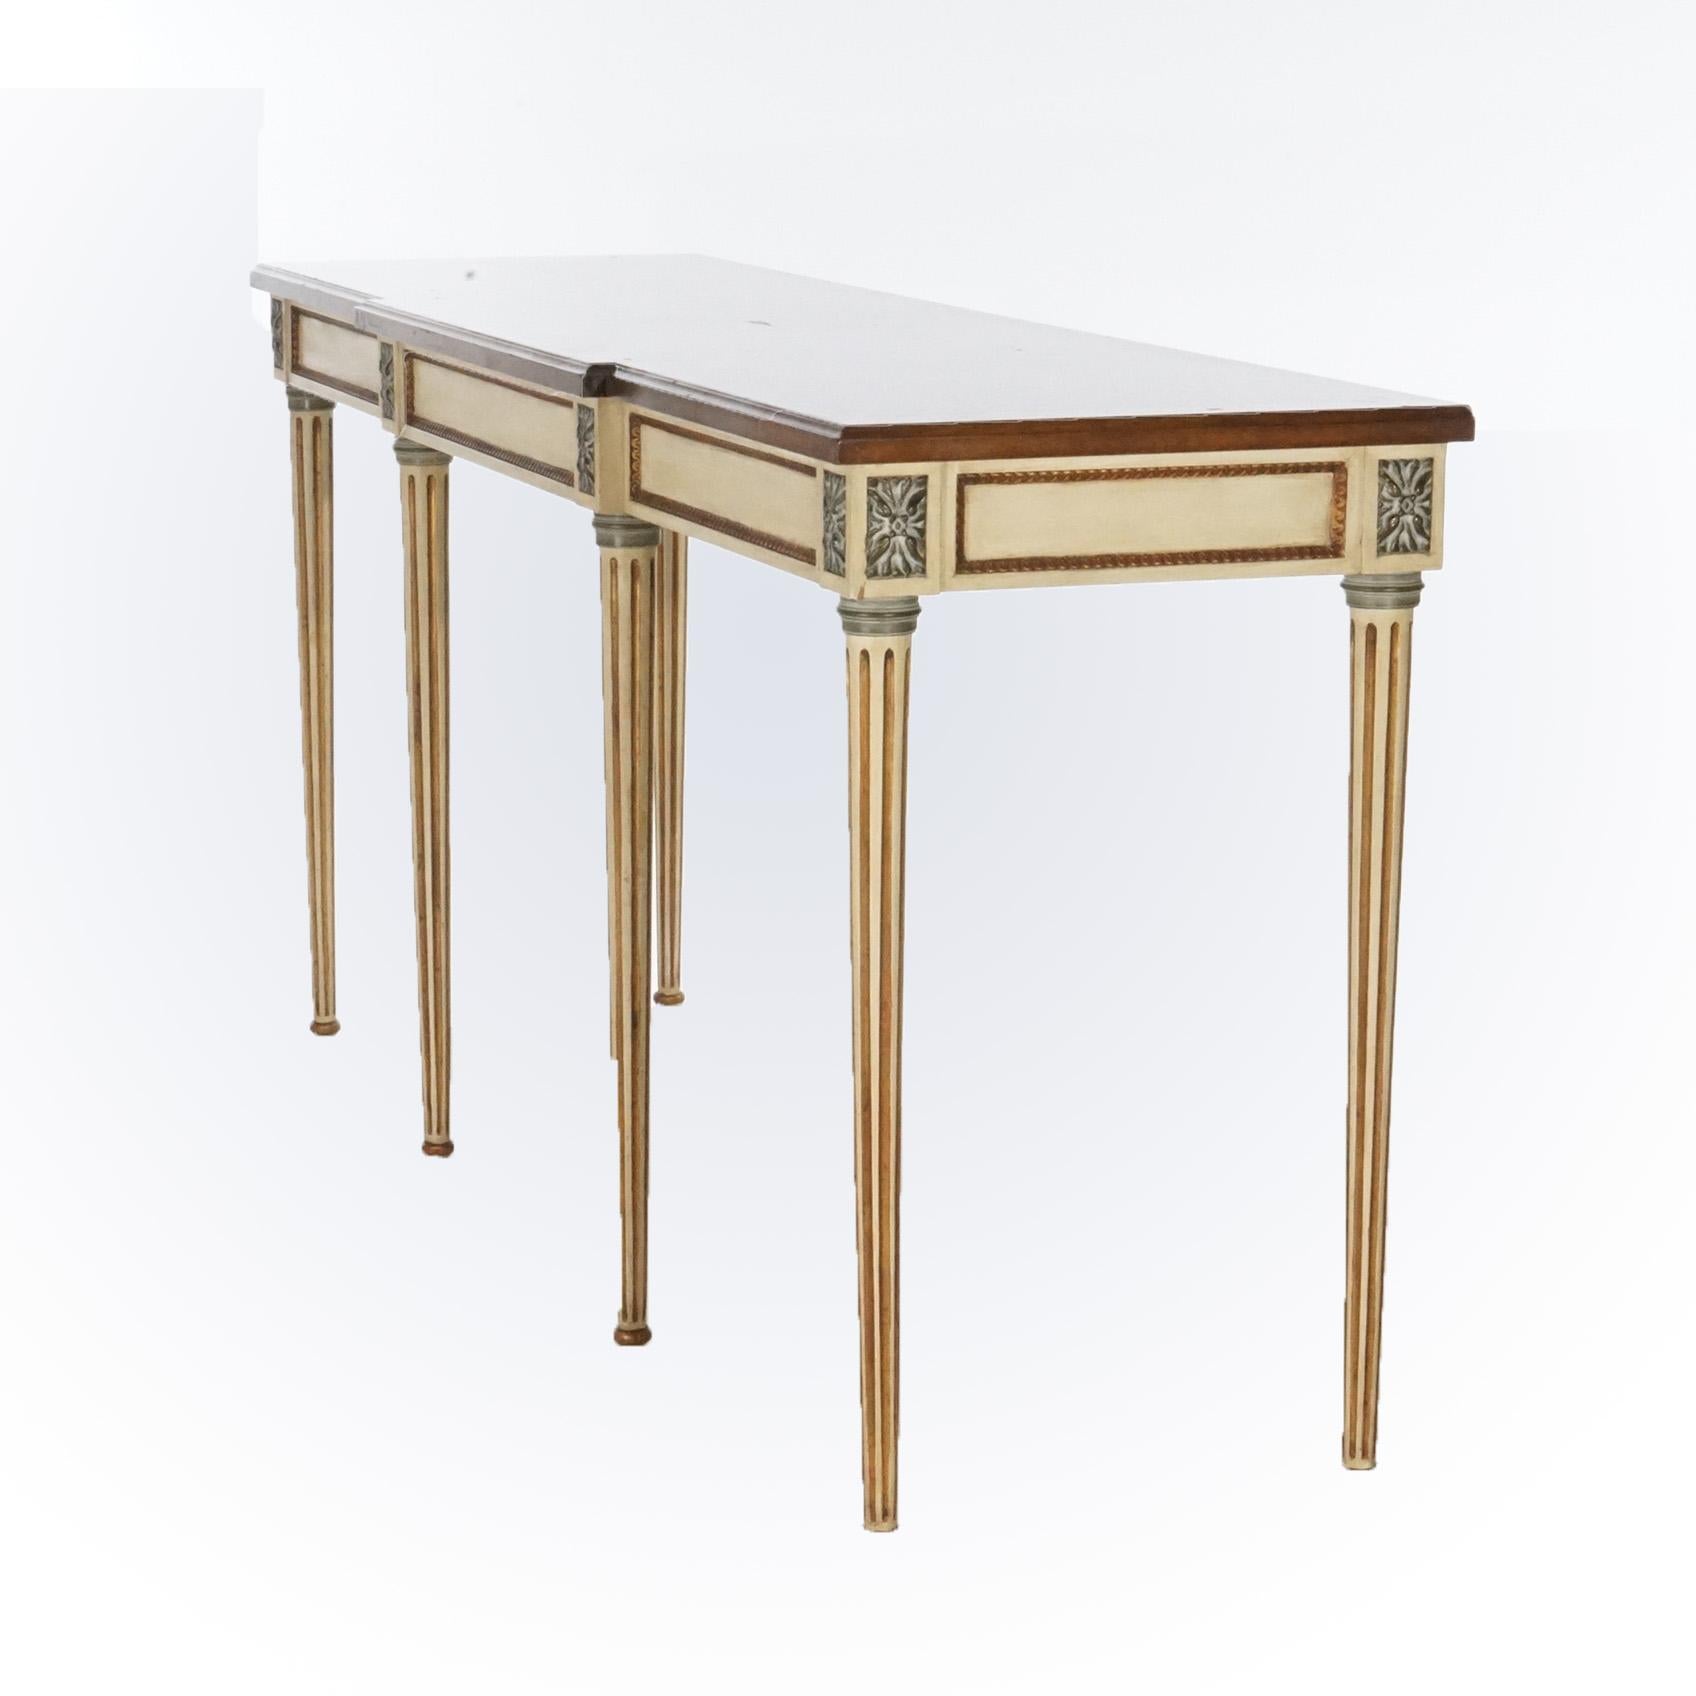 A French Louis XVI style console or sofa table offers shaped, beveled and bookmatched satinwood top over polychrome base having gilt rosettes over reeded and tapered legs having gilt highlights, 20th century

Measures- 34.5''H x 72''W x 21''D.